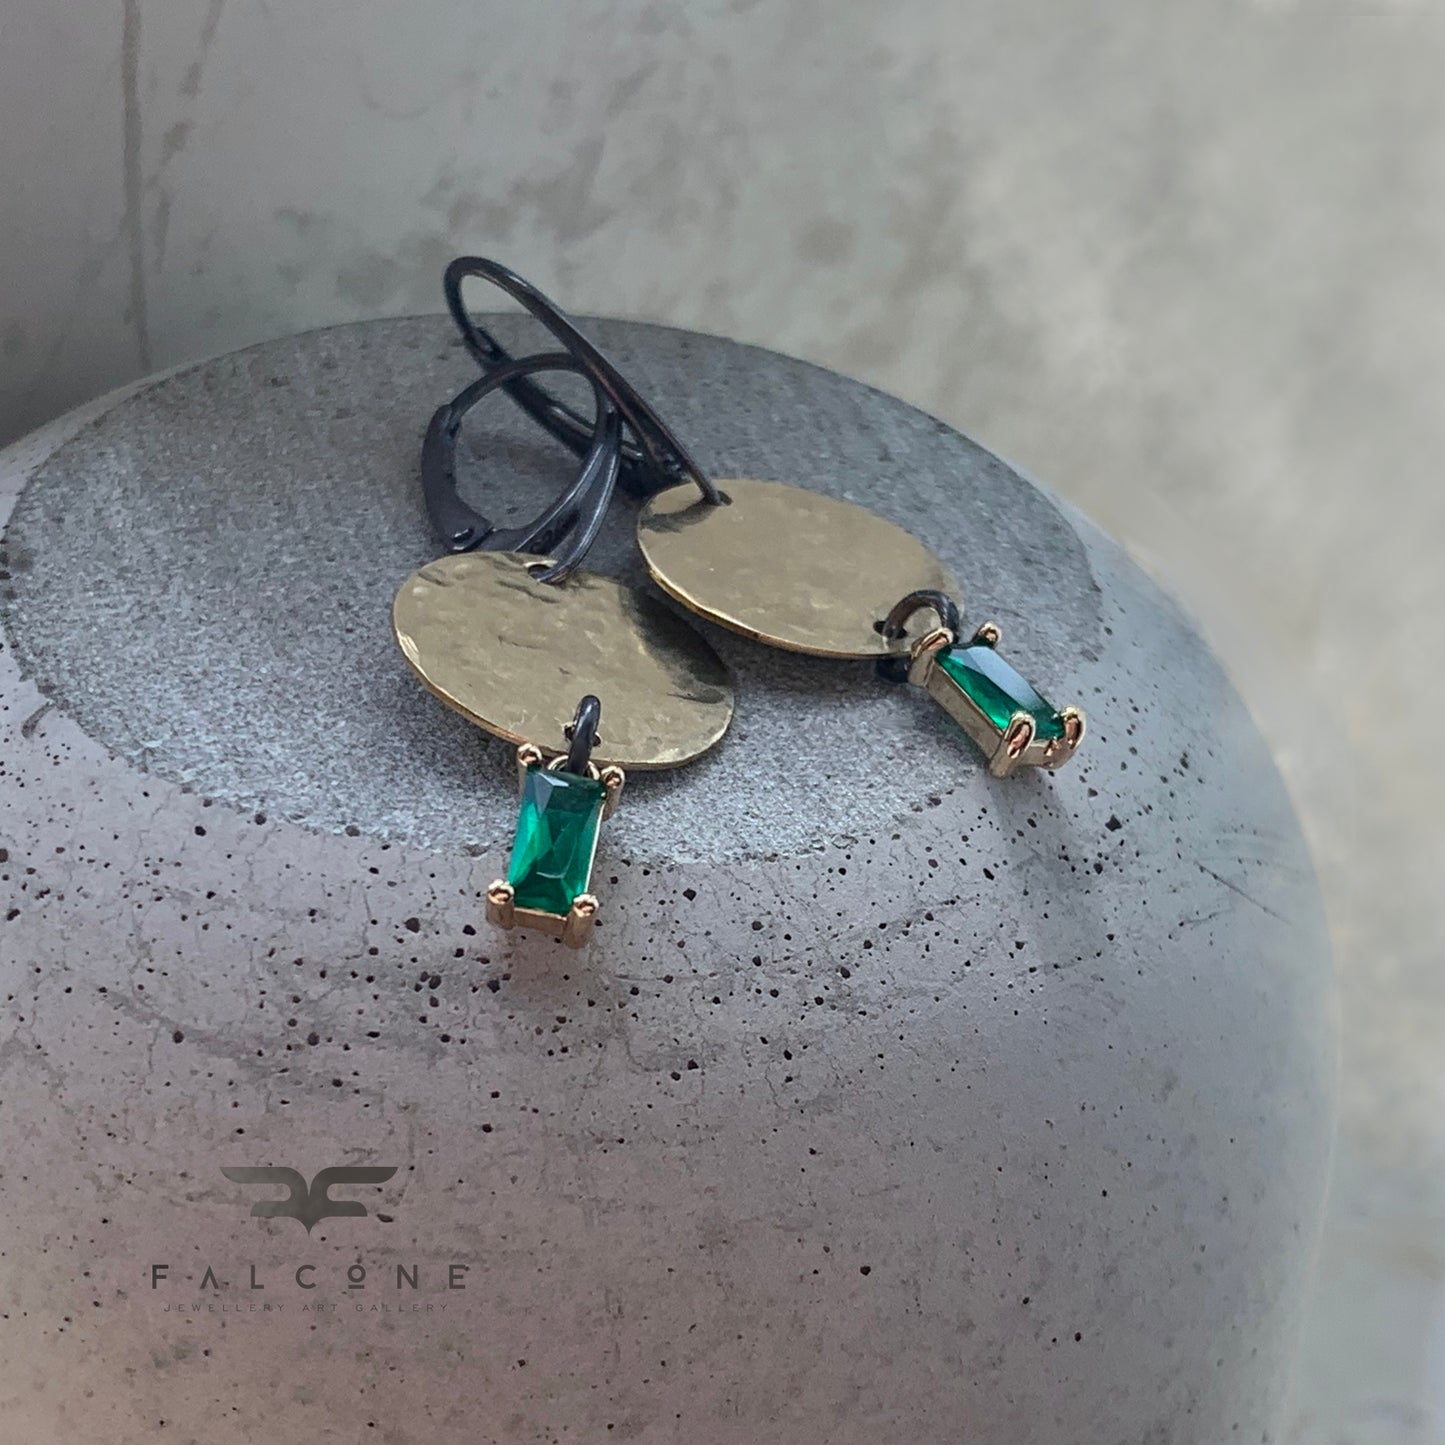 Earrings made of silver, brass and glass 'Emerald Green'